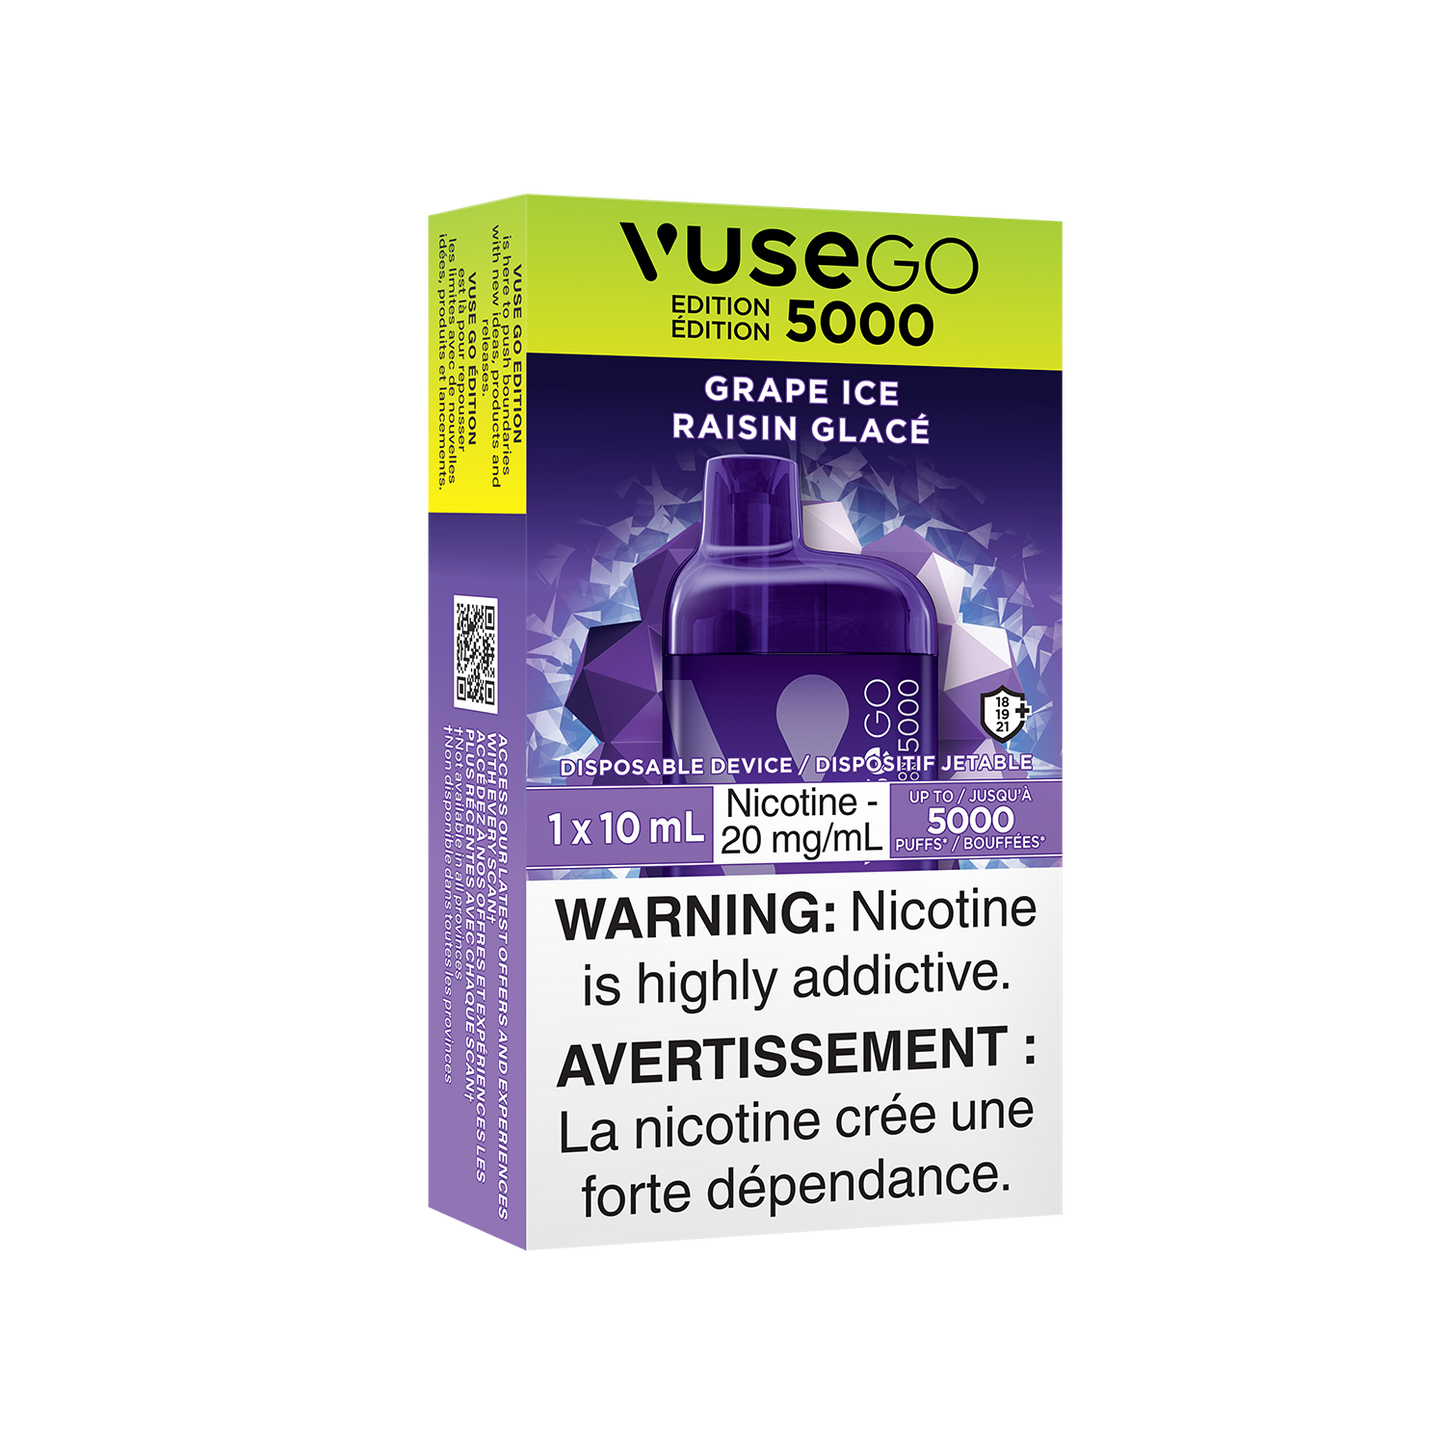 Vuse Go 5000 Edition - Grape Ice, 5000 Puffs